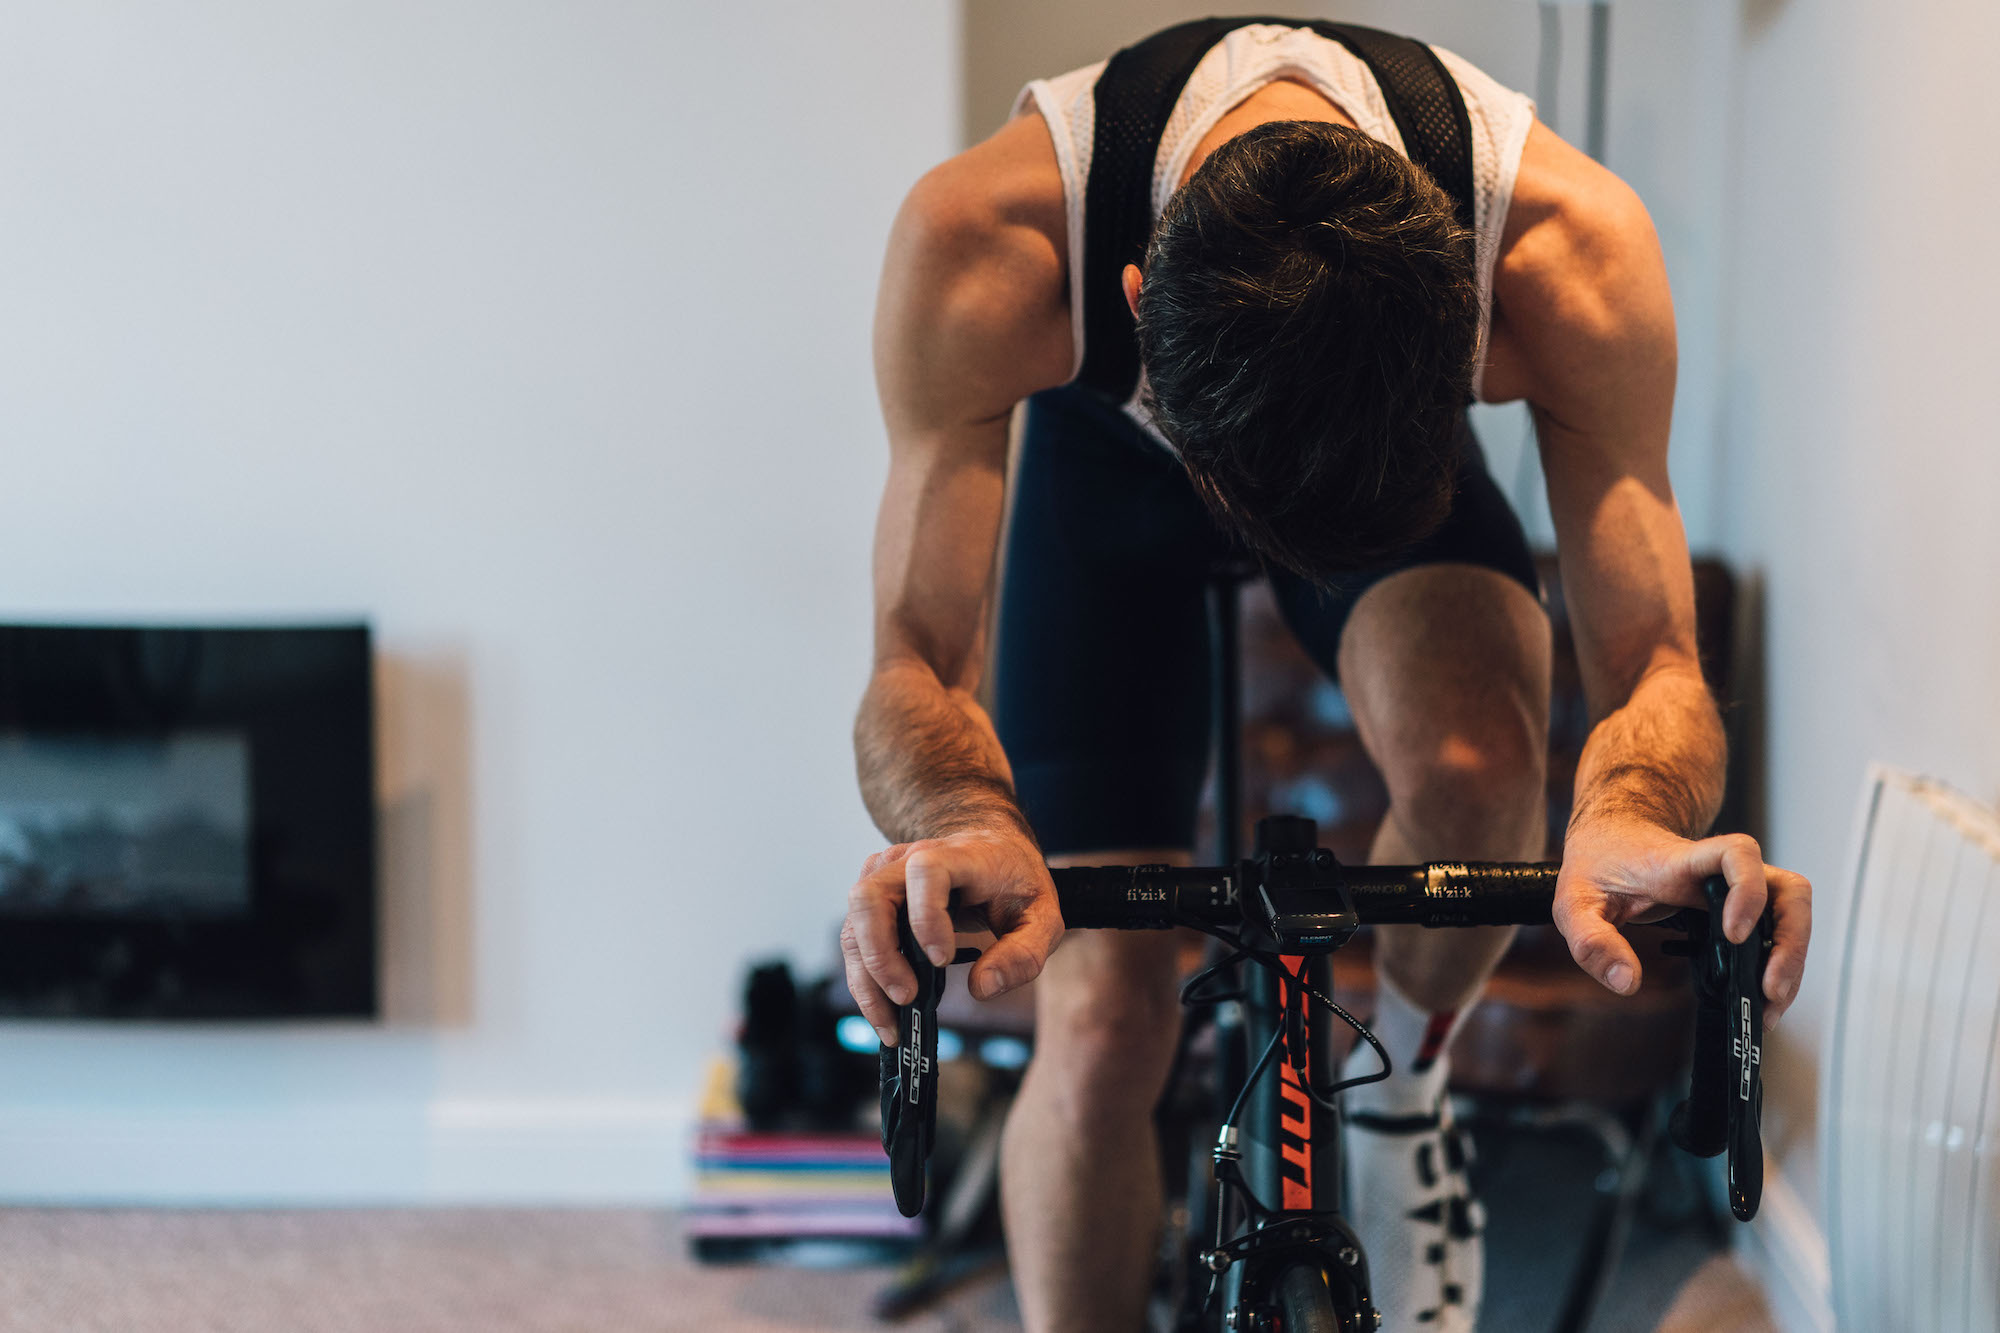 afstand gedragen Respectievelijk Seven HIIT workouts that take as little as 23 minutes | Cycling Weekly